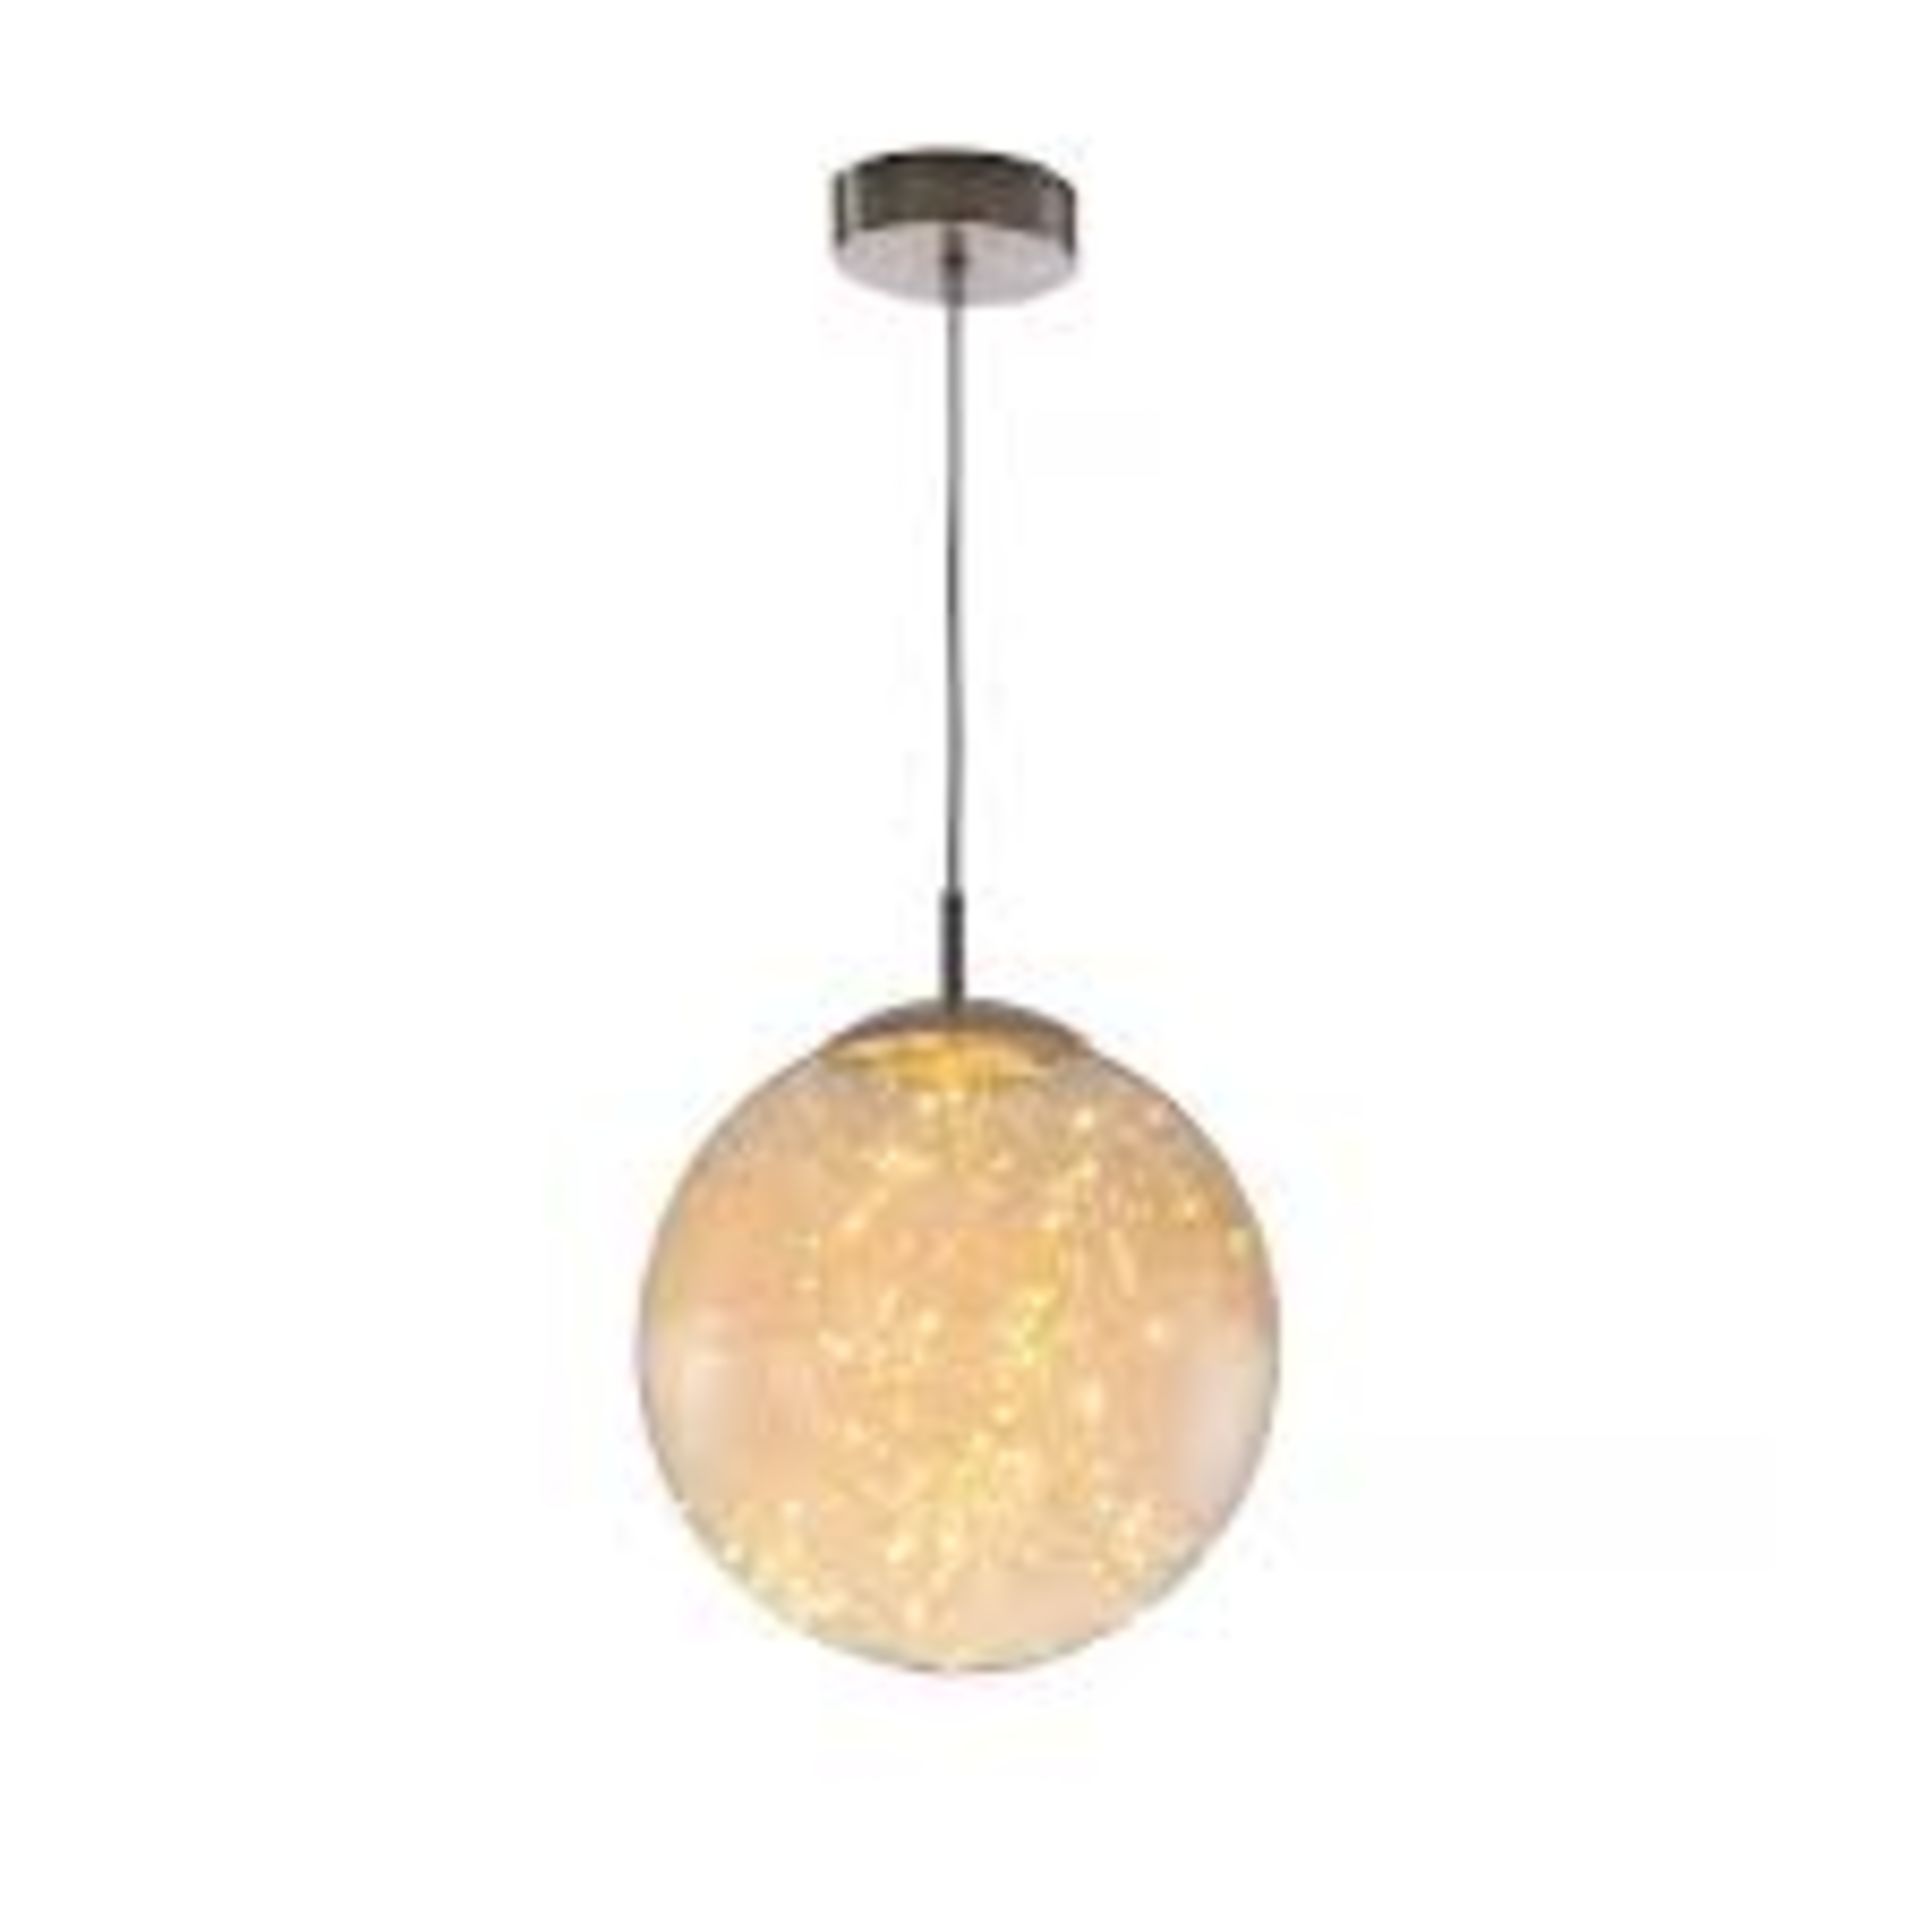 Lot to Contain 2 Boxed Nino Lights Single LED Pendant Lights (8482)(NLN1746) Combined RRP £100